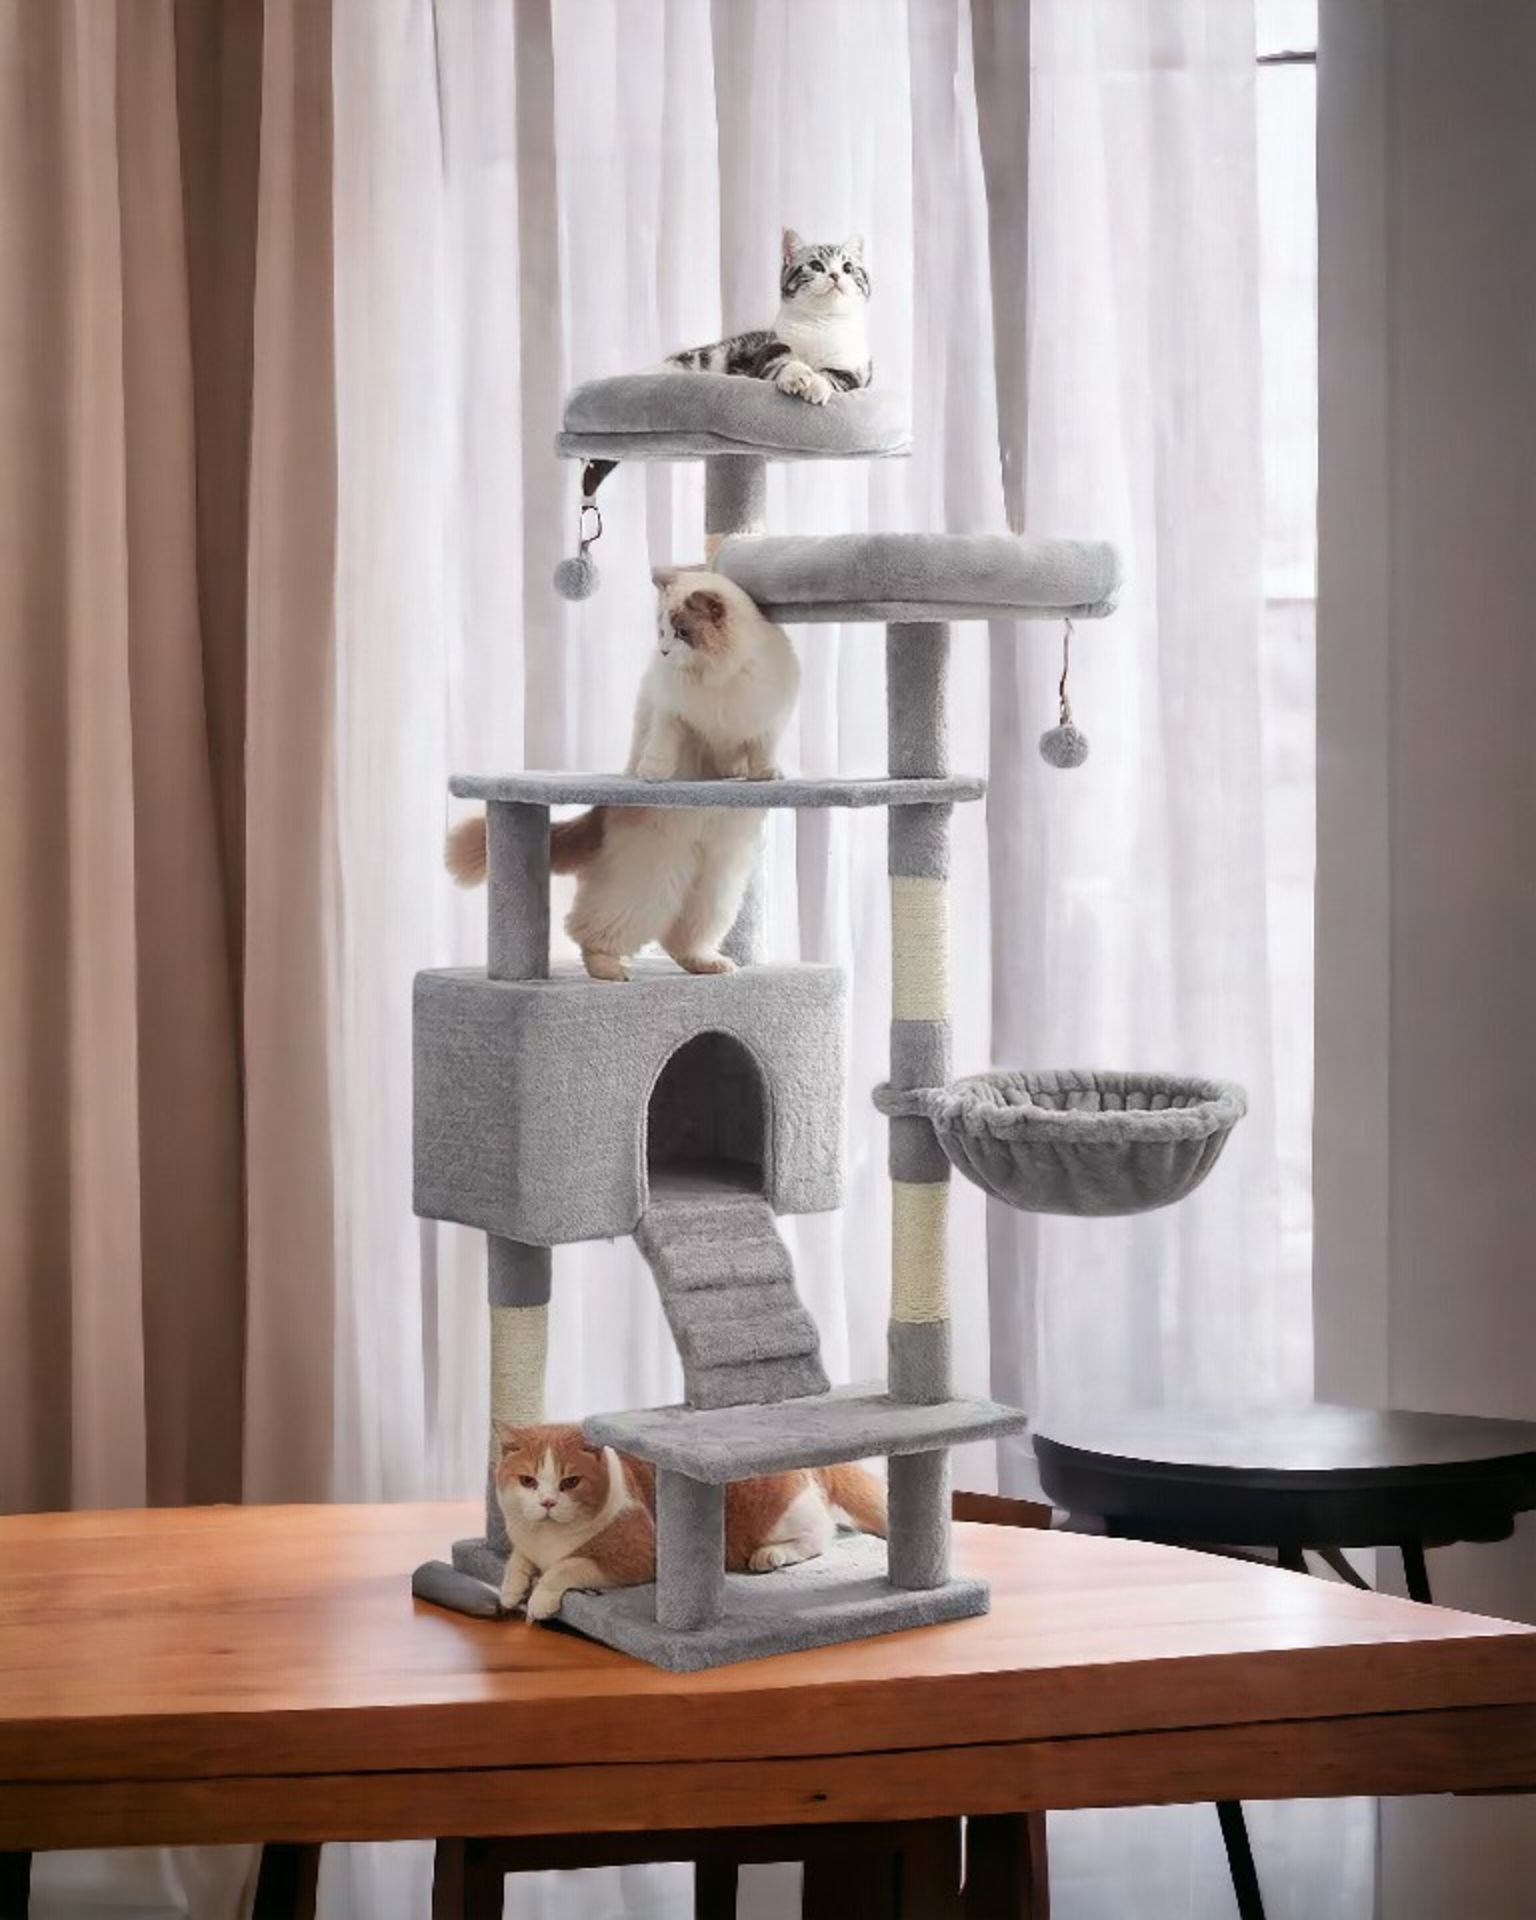 FREE DELIVERY - BRAND NEW FEANDREA CAT TREE, CAT TOWER 142 CM, CAT ACTIVITY CENTRE